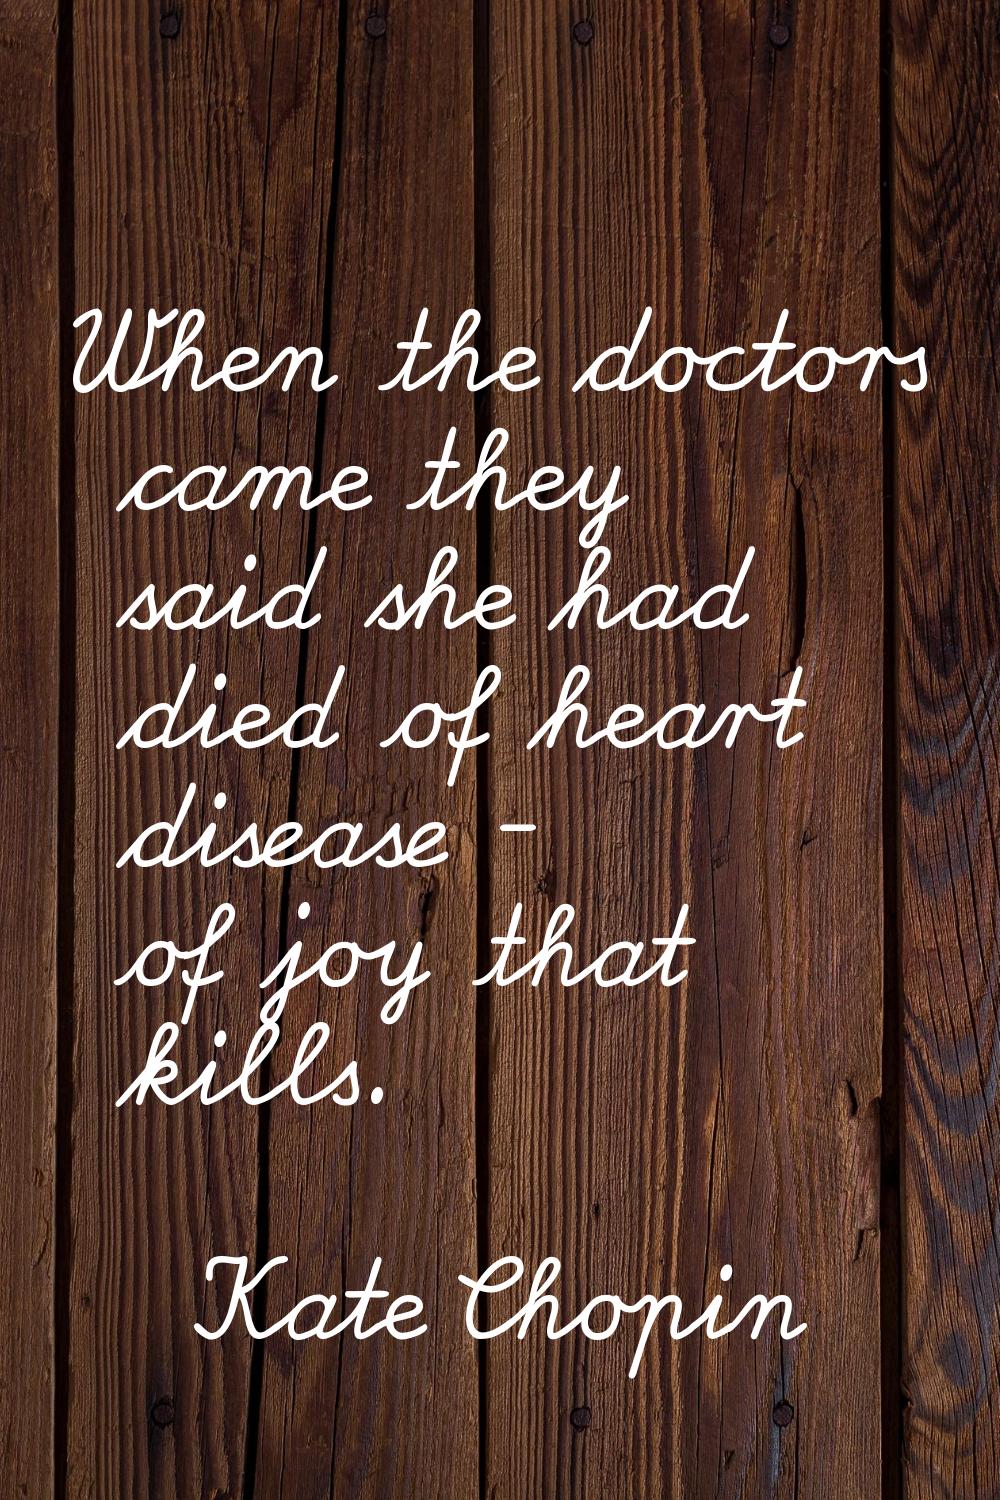 When the doctors came they said she had died of heart disease - of joy that kills.